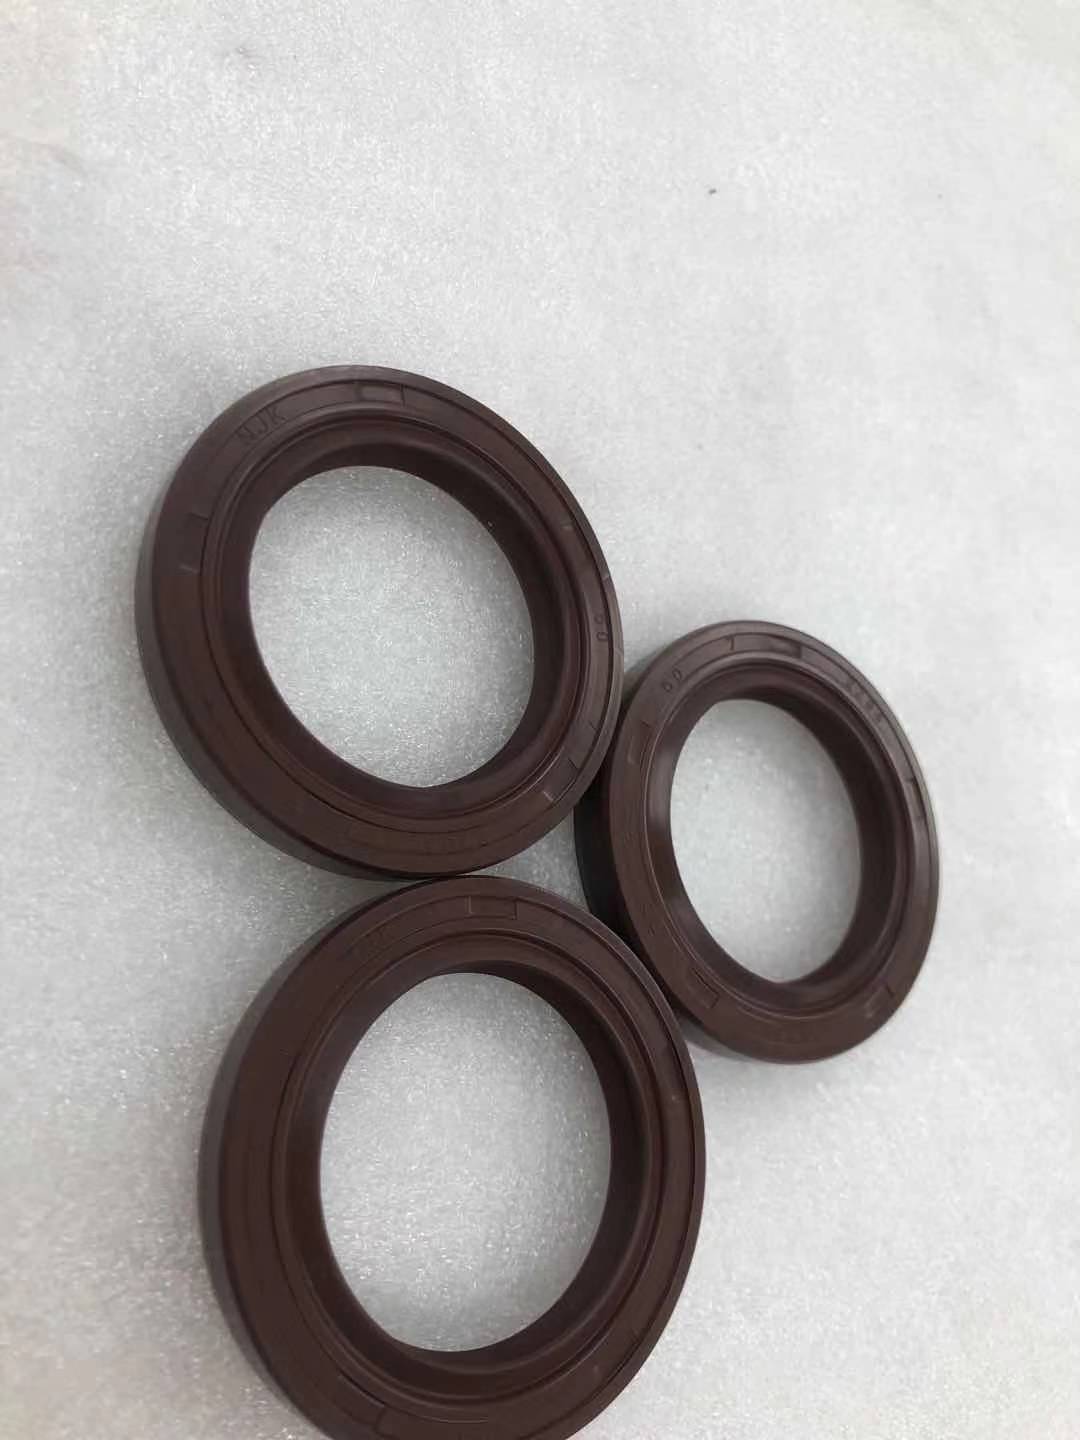 DAYANG Hot Sale Motorcycle Parts LIFAN High Performance CB125 engine oil seal Box Packing Plastic Material Origin Type Quality